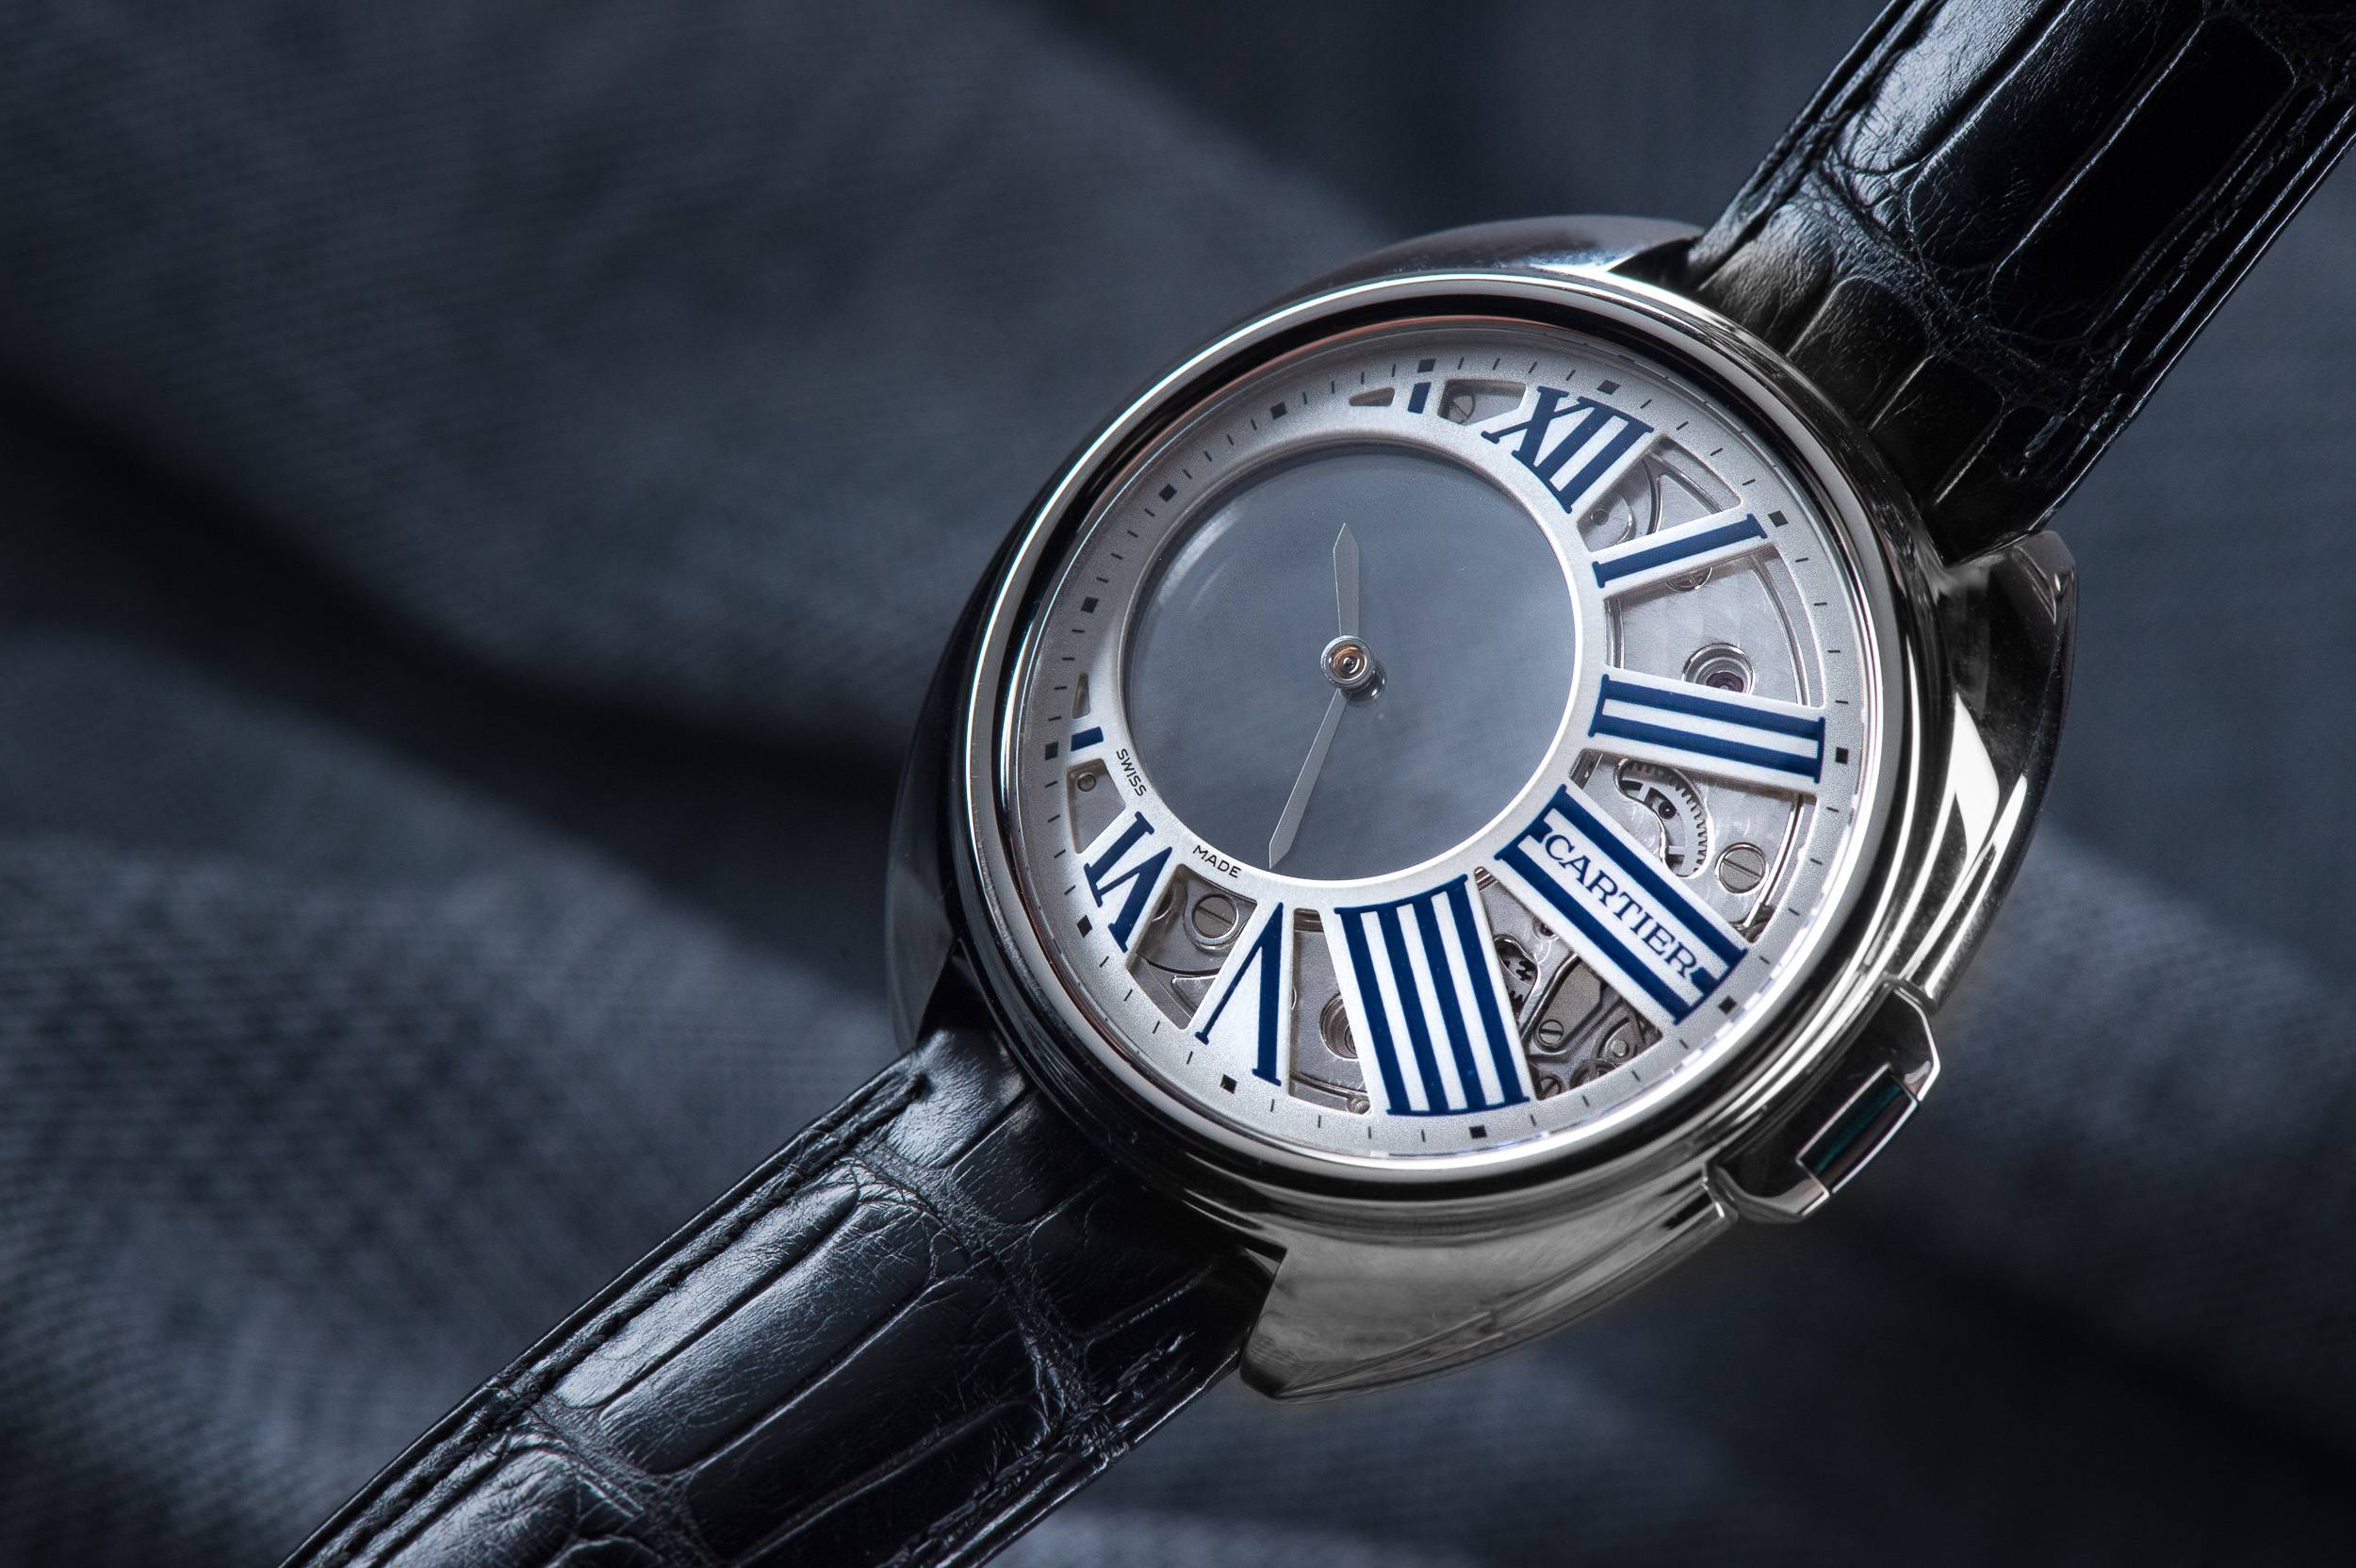 Introducing The Clé de Cartier Mysterious Hour Watch (Live Pictures From Watches & Wonders 2015)